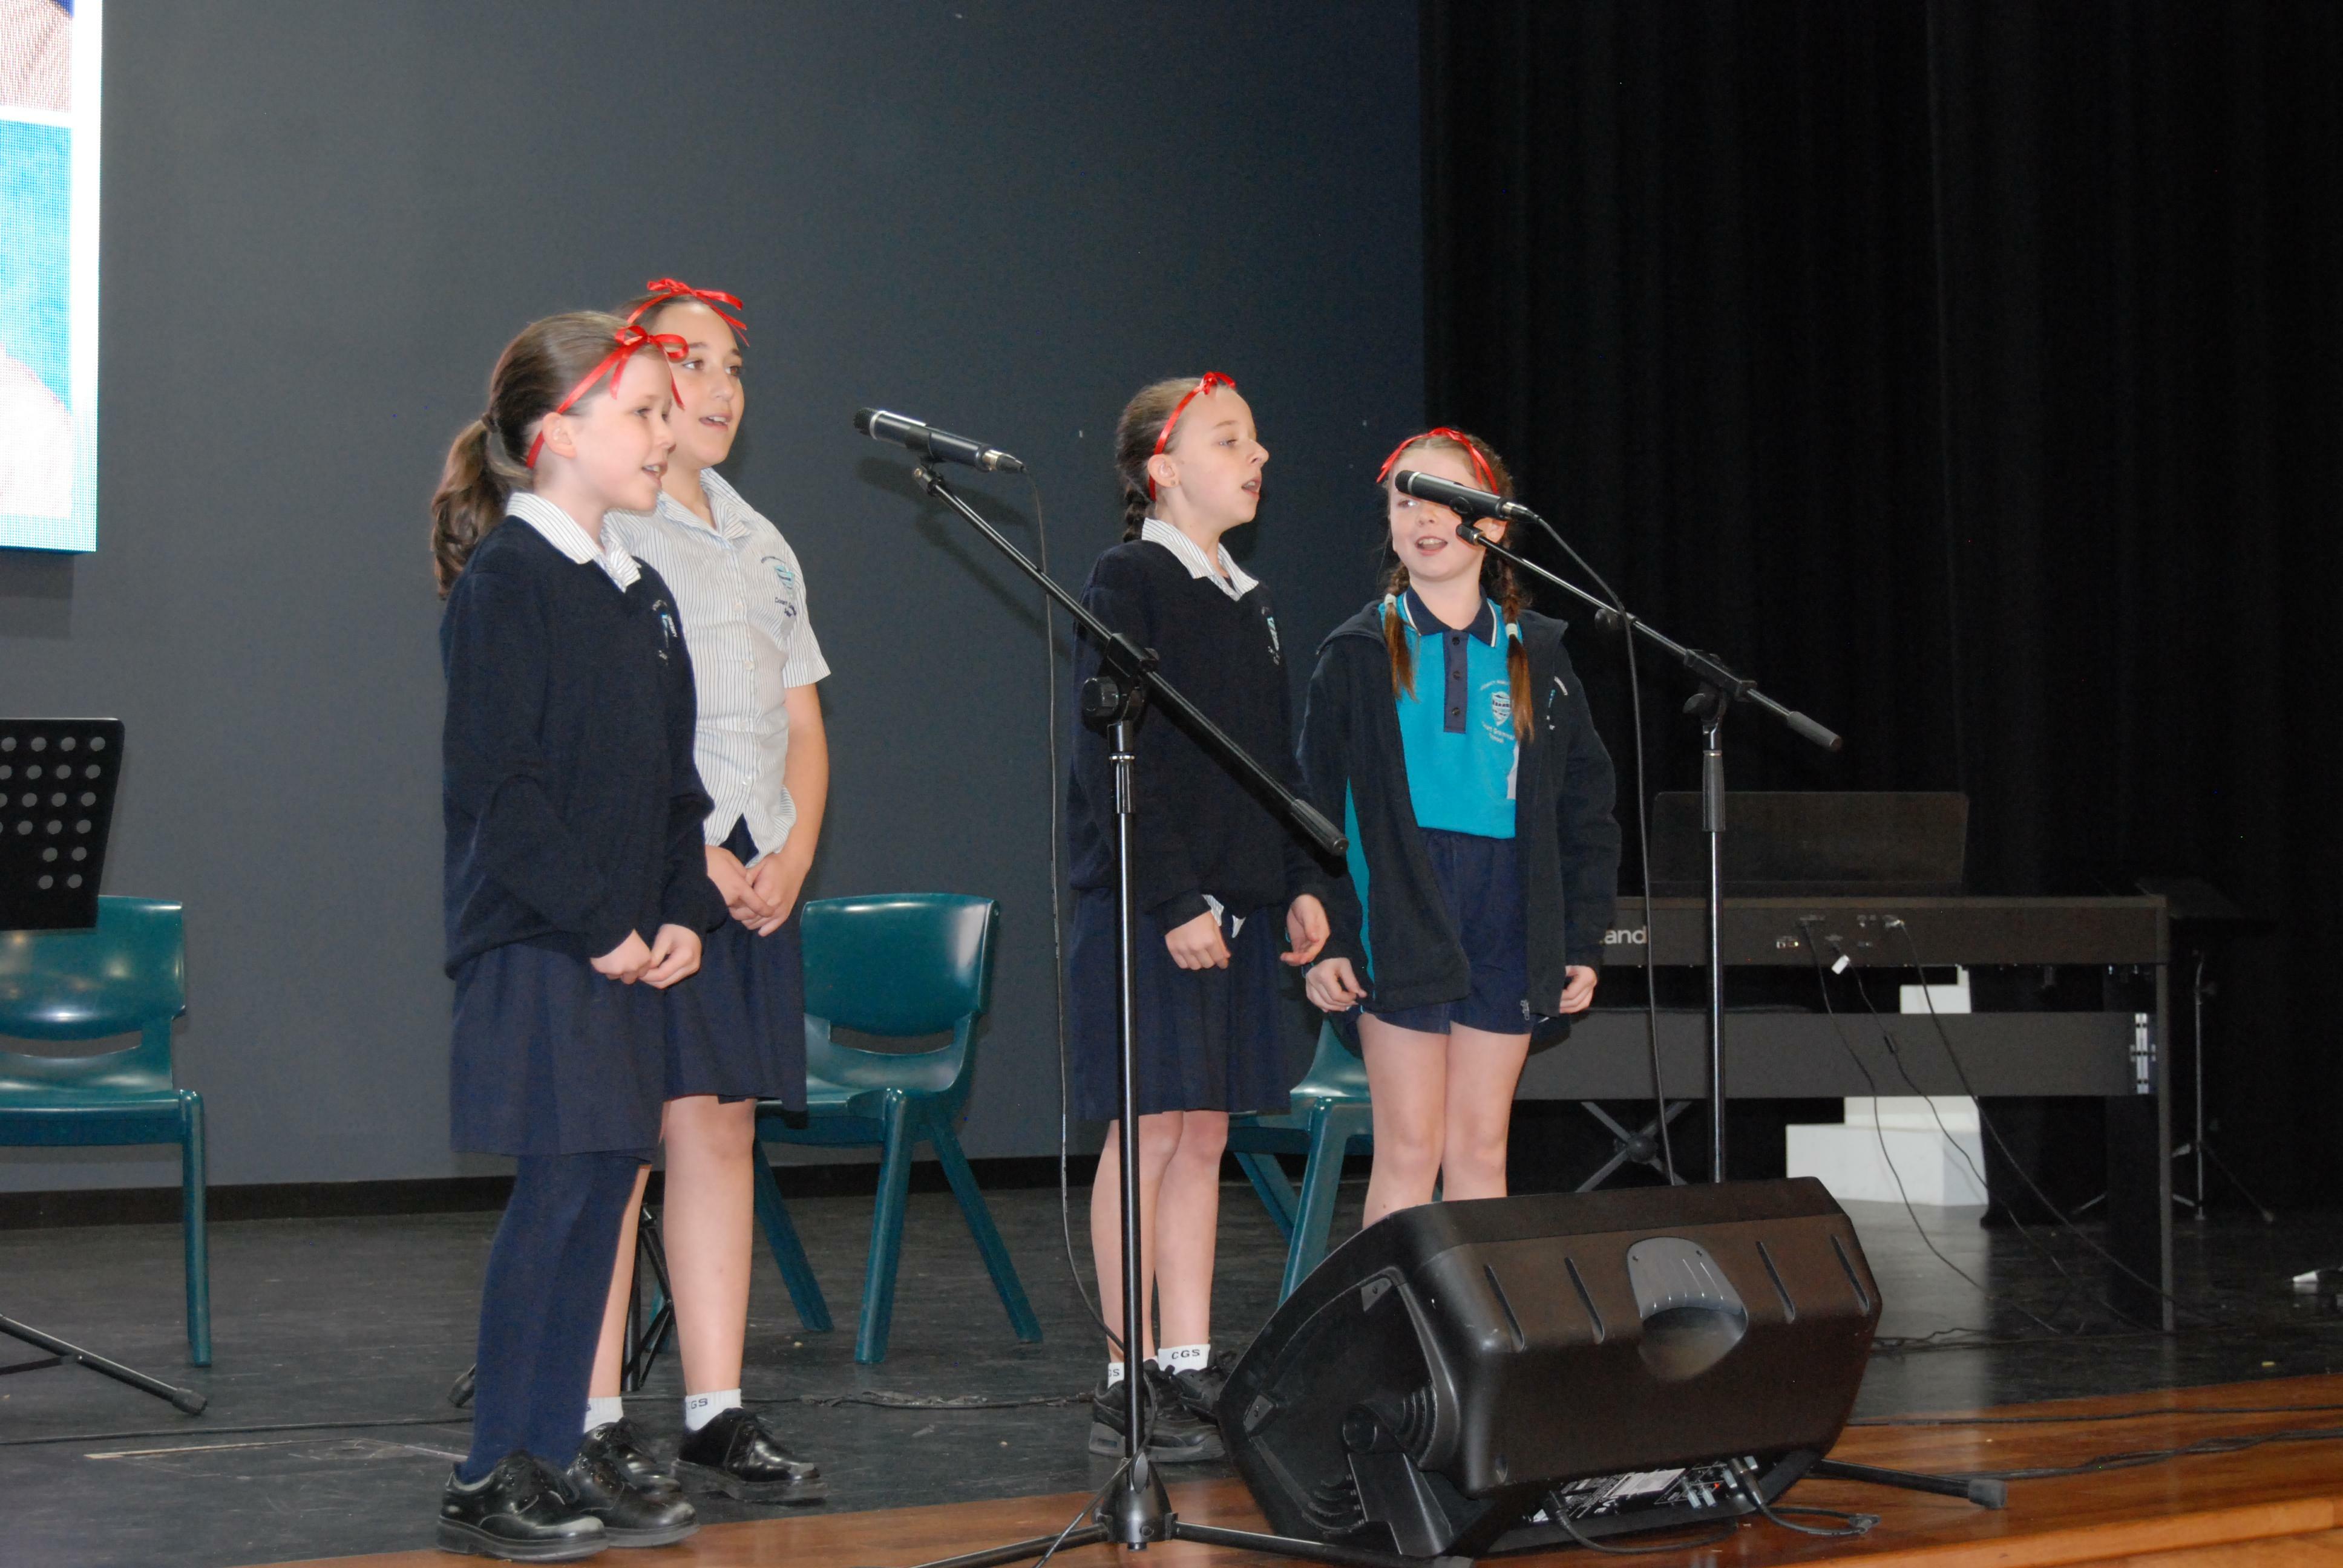 Musical performances assembly6